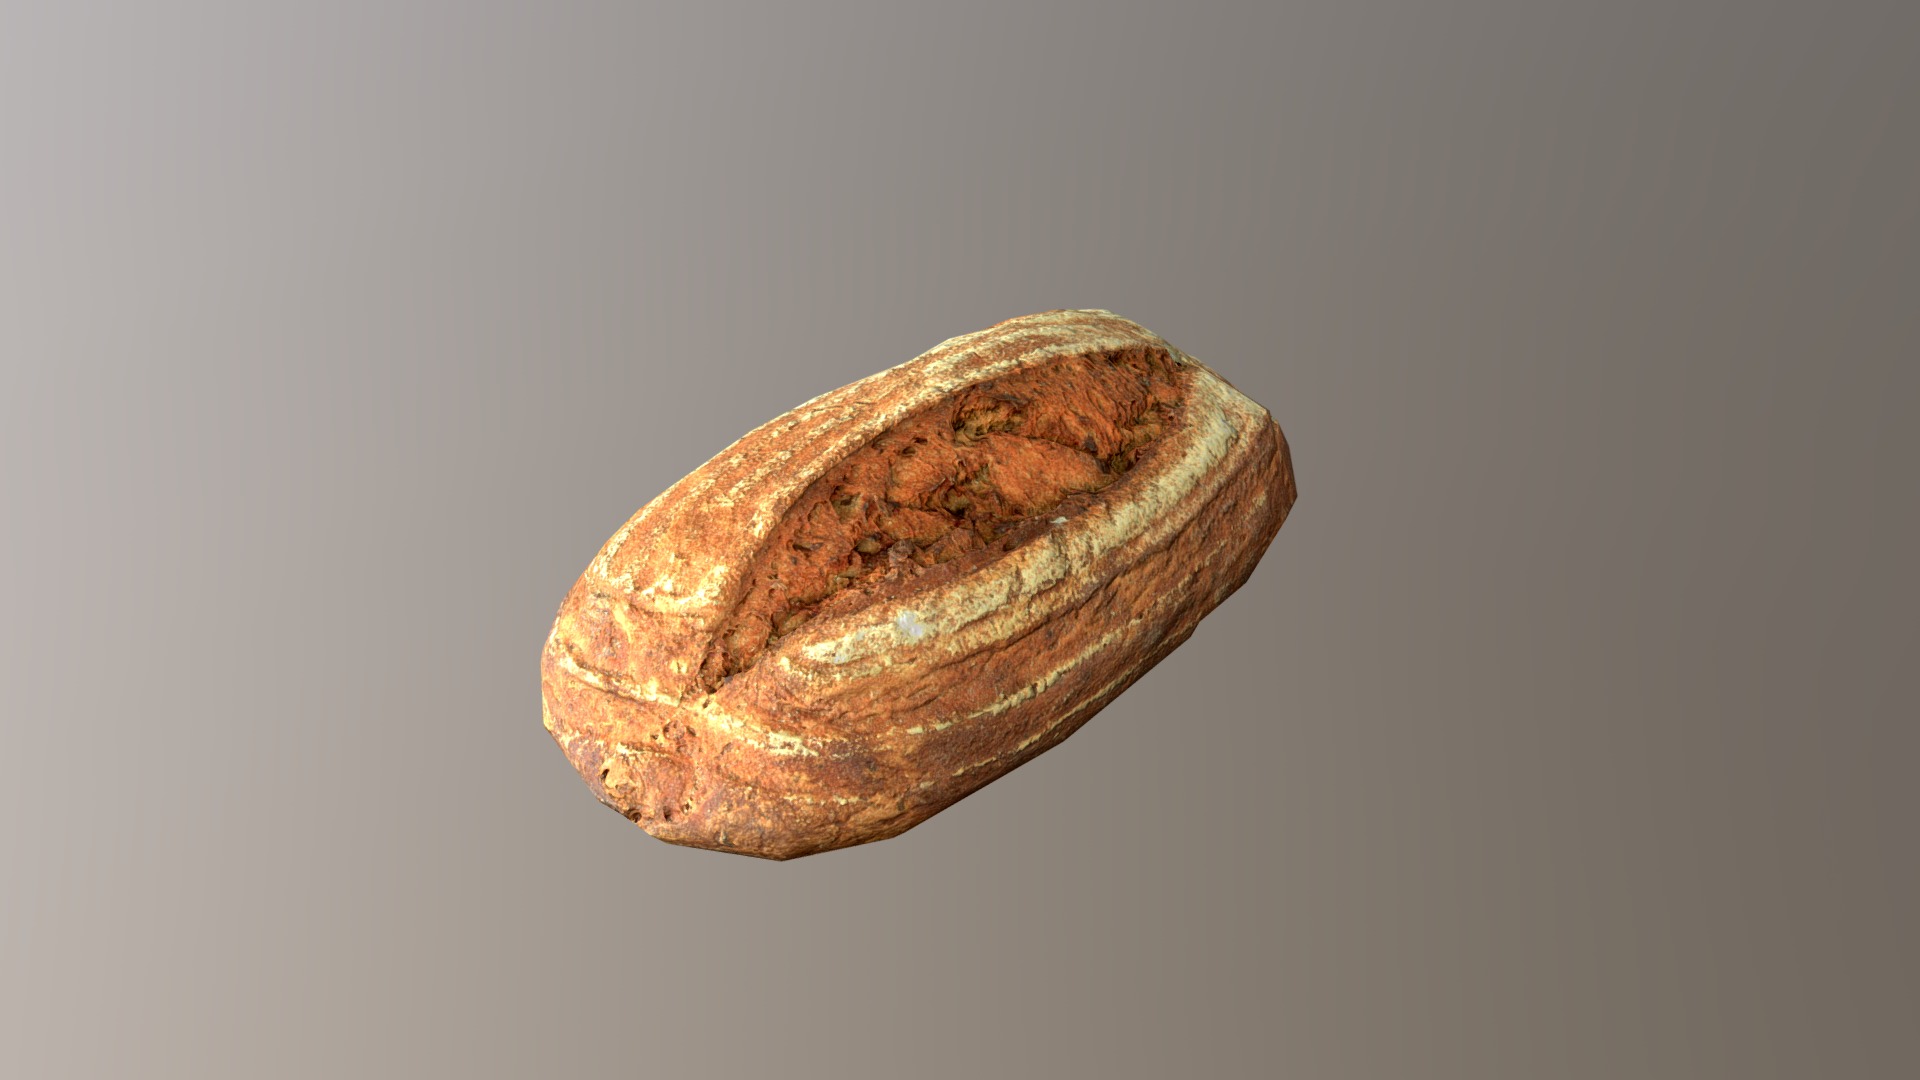 3D model TastyBreadPack vol.01 Model Eighth - This is a 3D model of the TastyBreadPack vol.01 Model Eighth. The 3D model is about a close up of a potato.